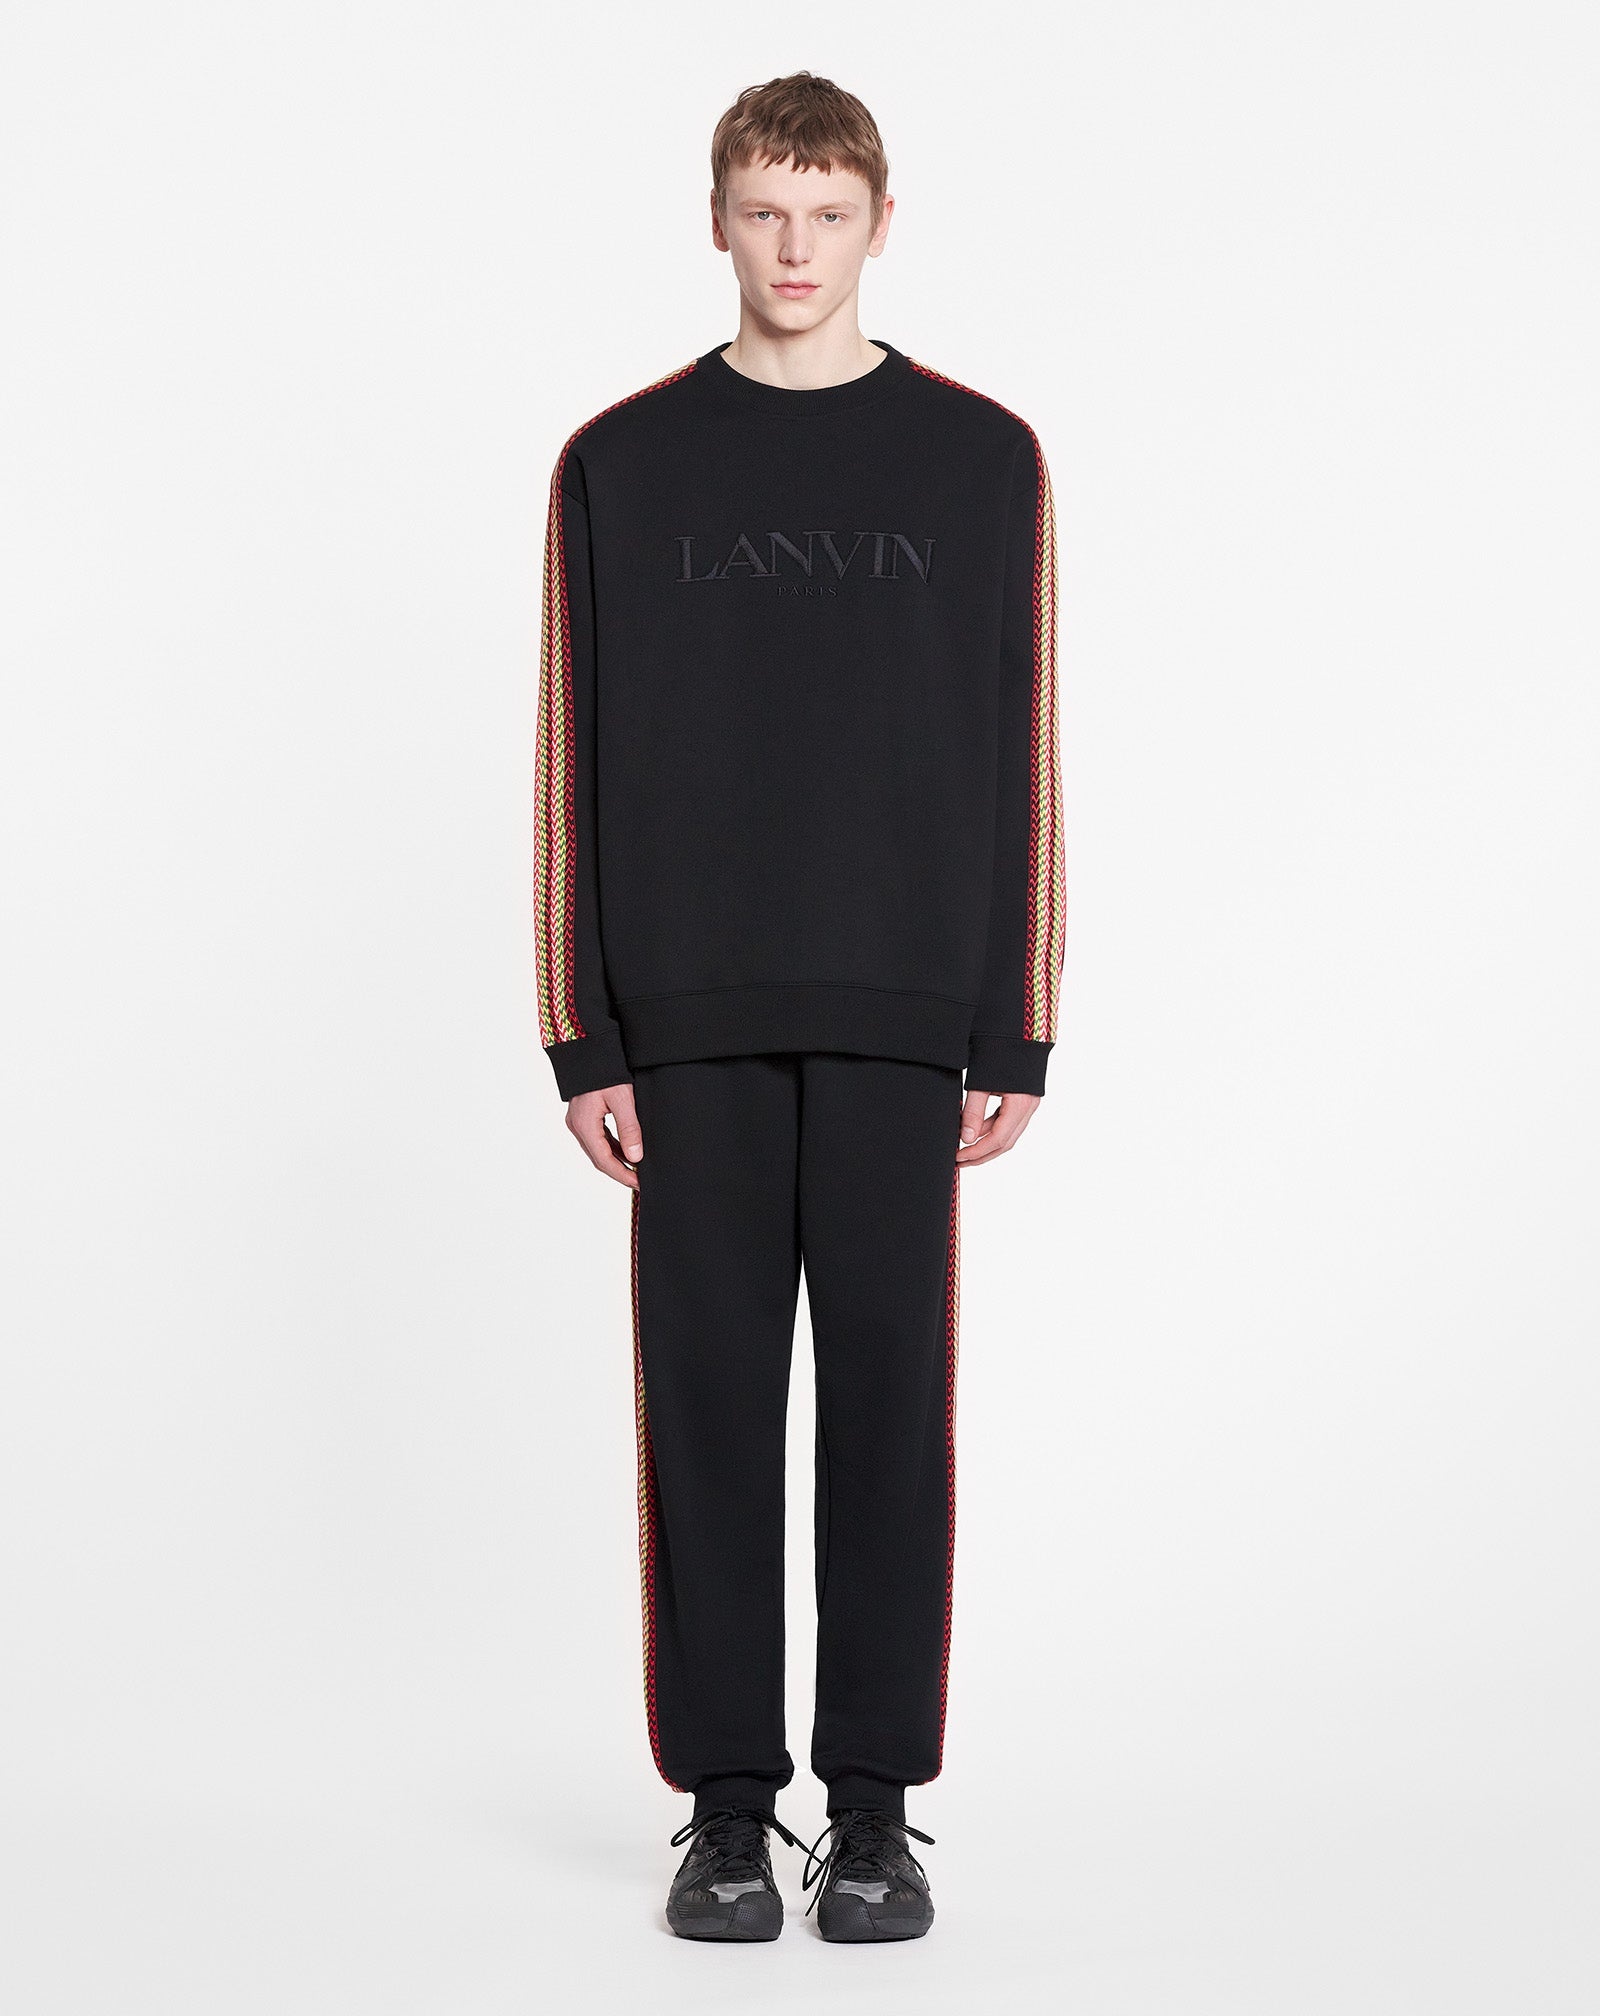 OVERSIZED LANVIN EMBROIDERED SIDE CURB SWEATSHIRT - 2